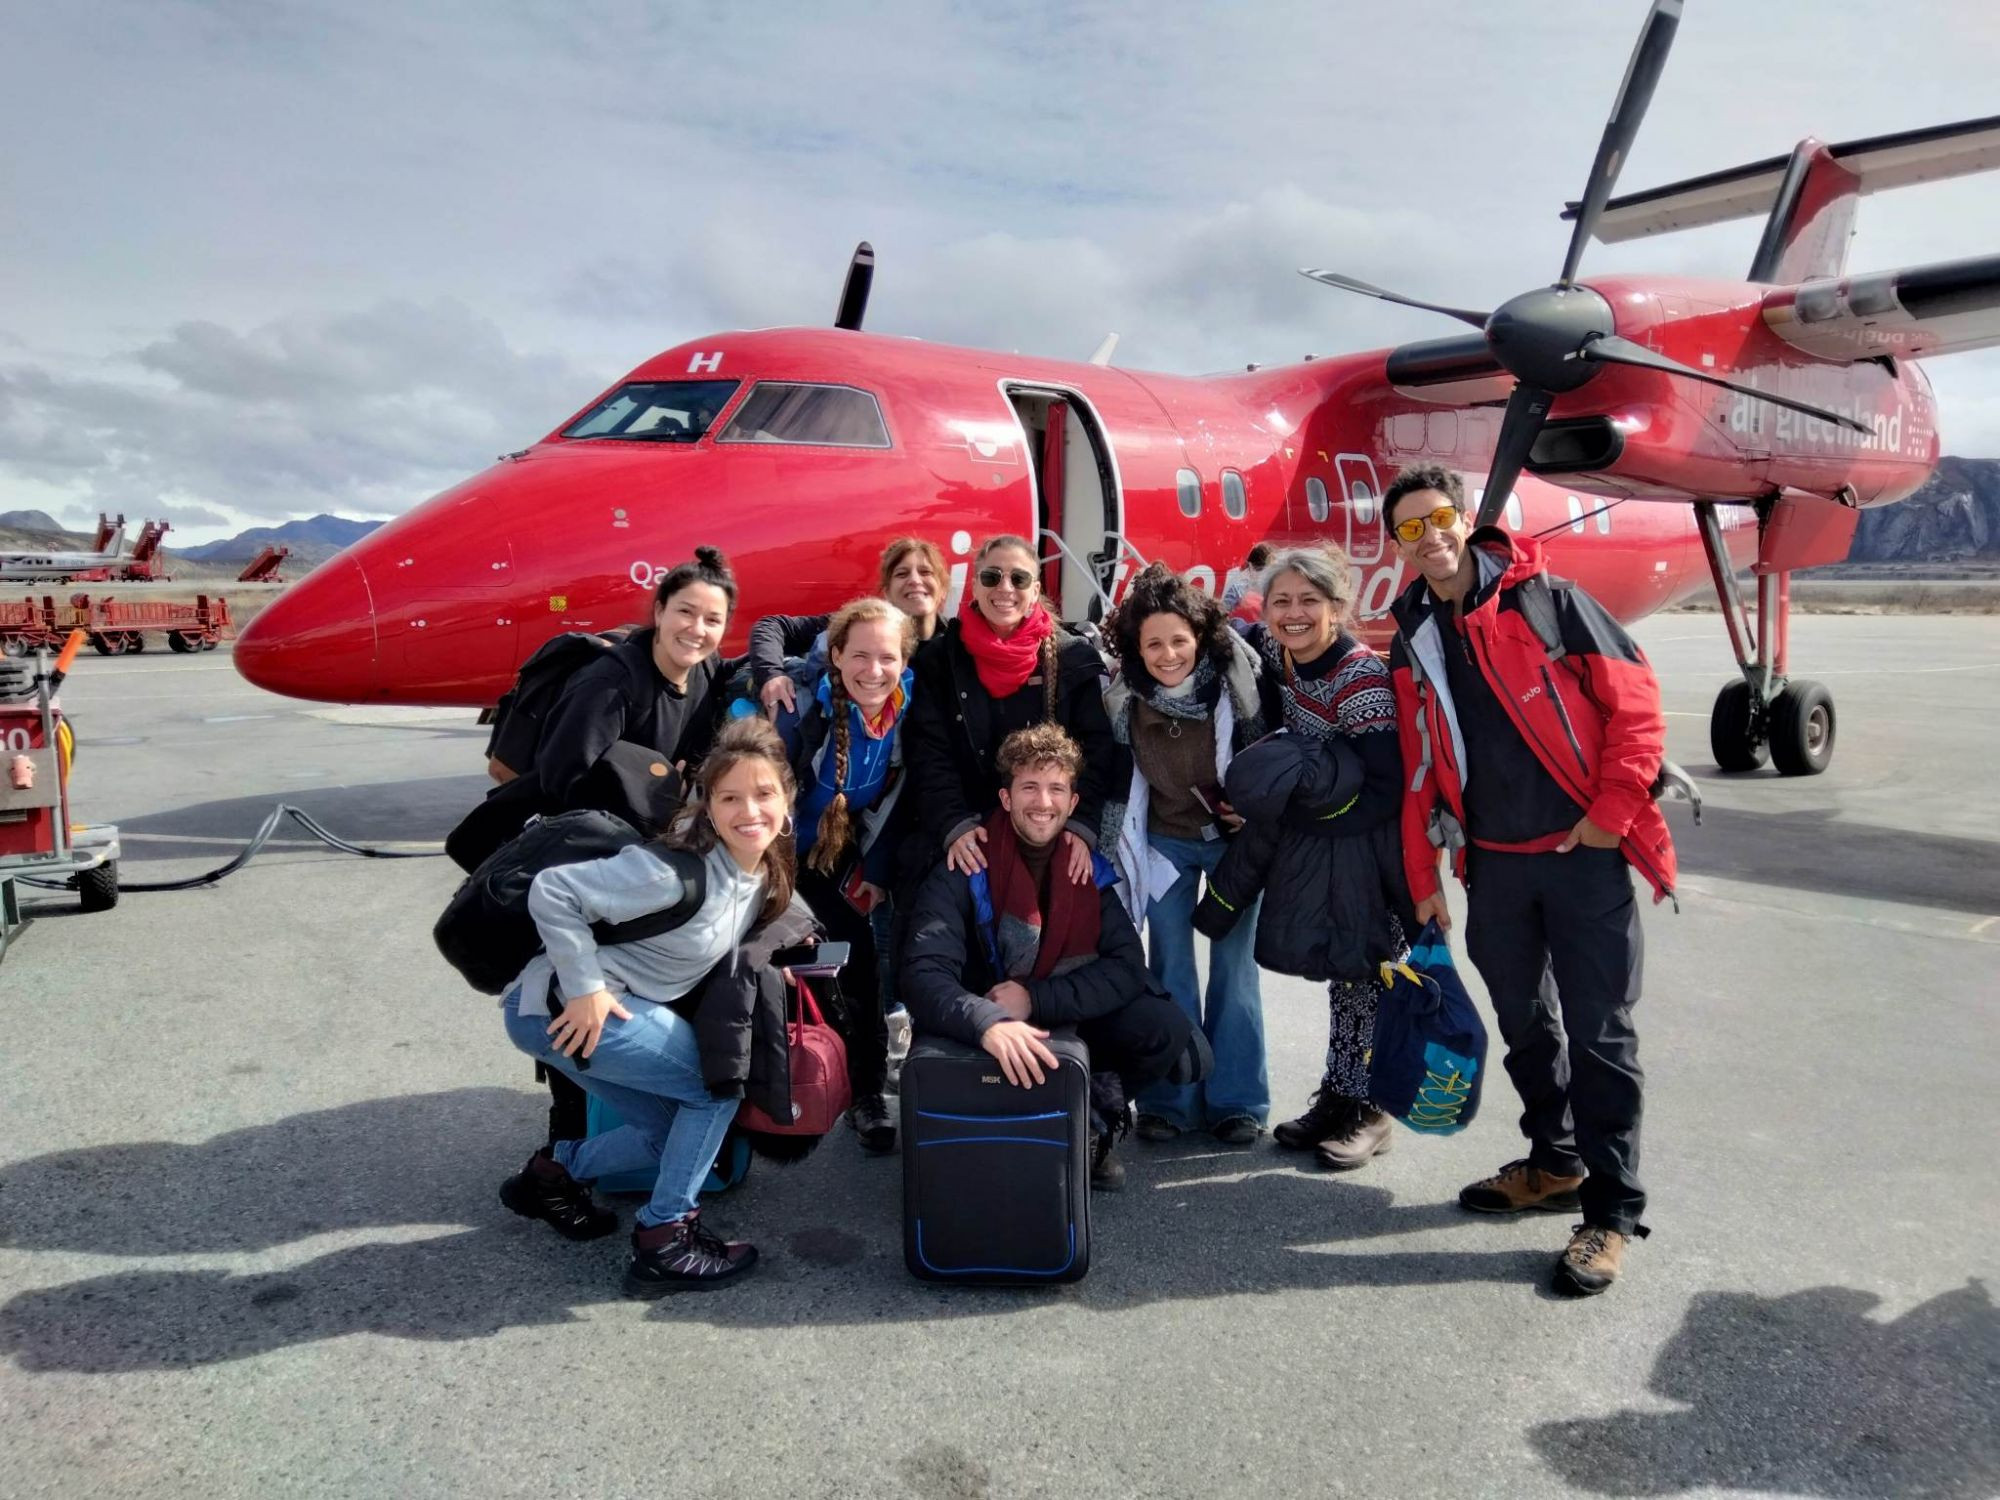 NTL brings sound and play to Greenland